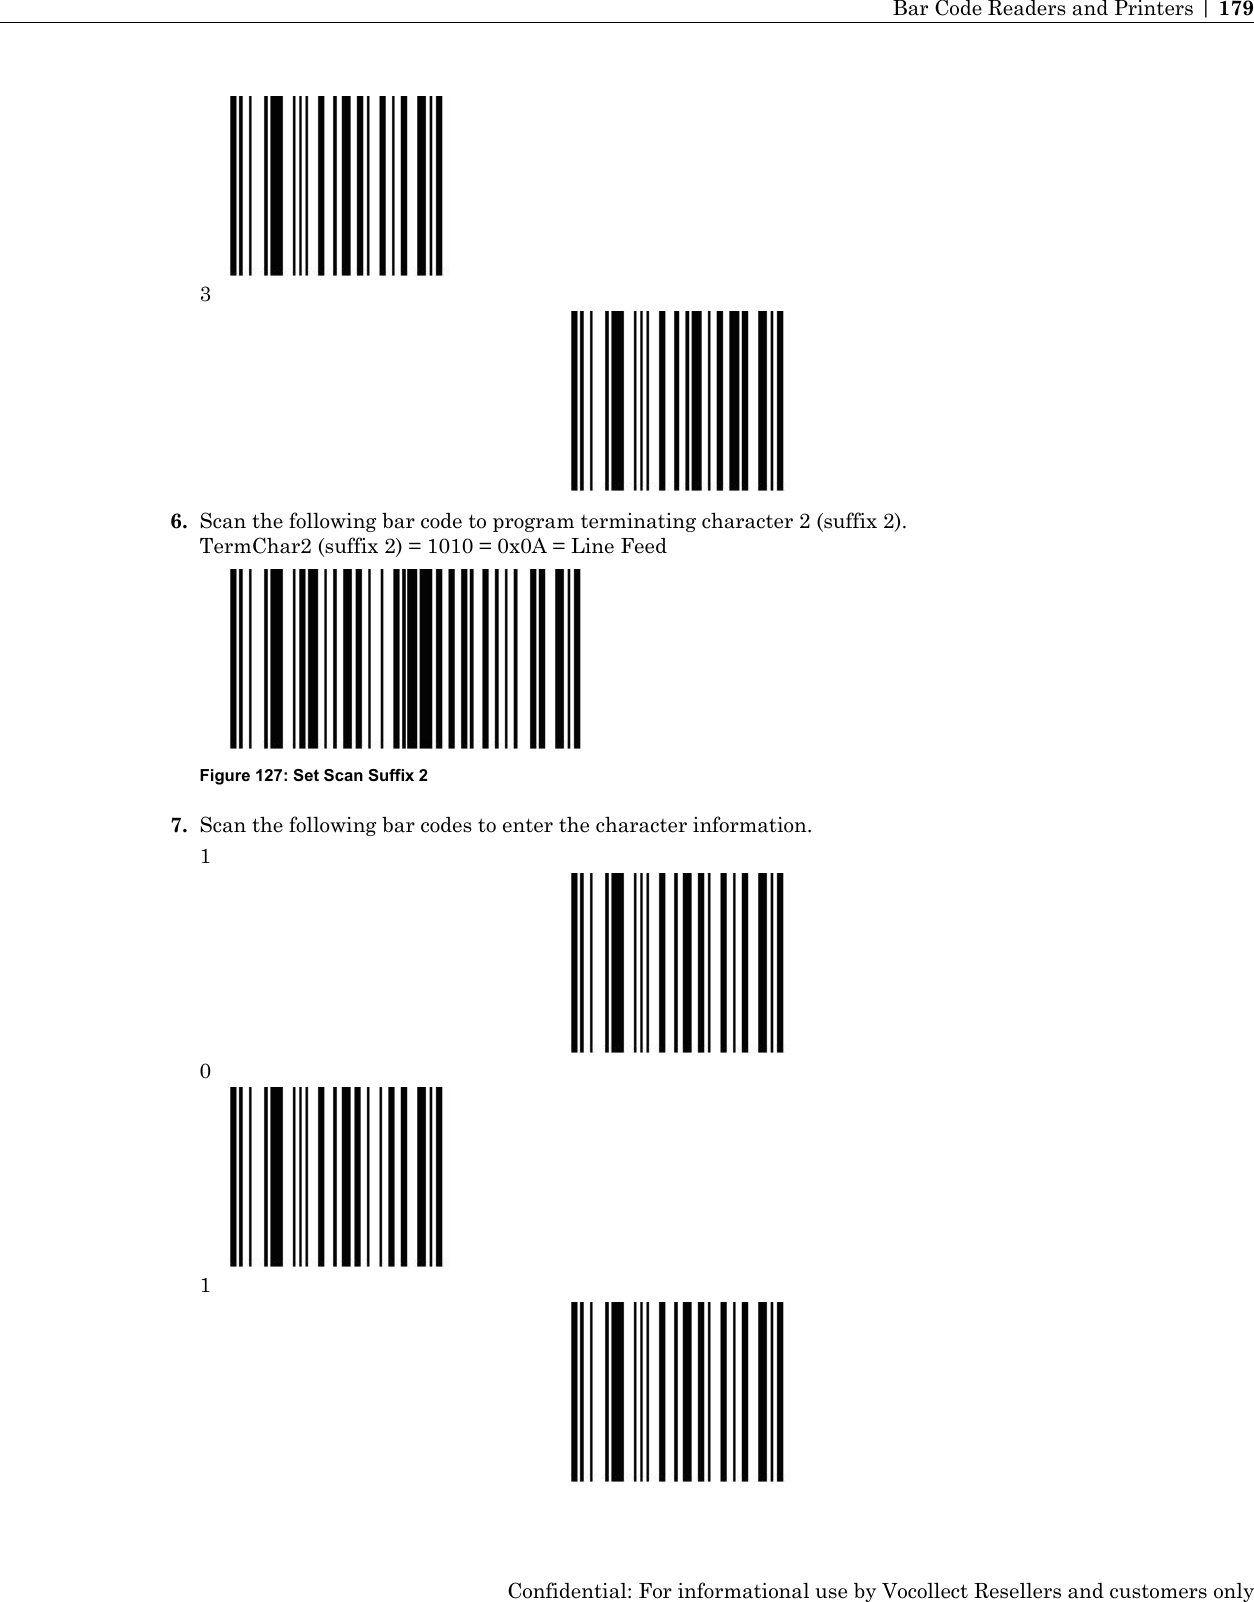 36. Scan the following bar code to program terminating character 2 (suffix 2).TermChar2 (suffix 2) = 1010 = 0x0A = Line FeedFigure 127: Set Scan Suffix 27. Scan the following bar codes to enter the character information.101Confidential: For informational use by Vocollect Resellers and customers onlyBar Code Readers and Printers | 179